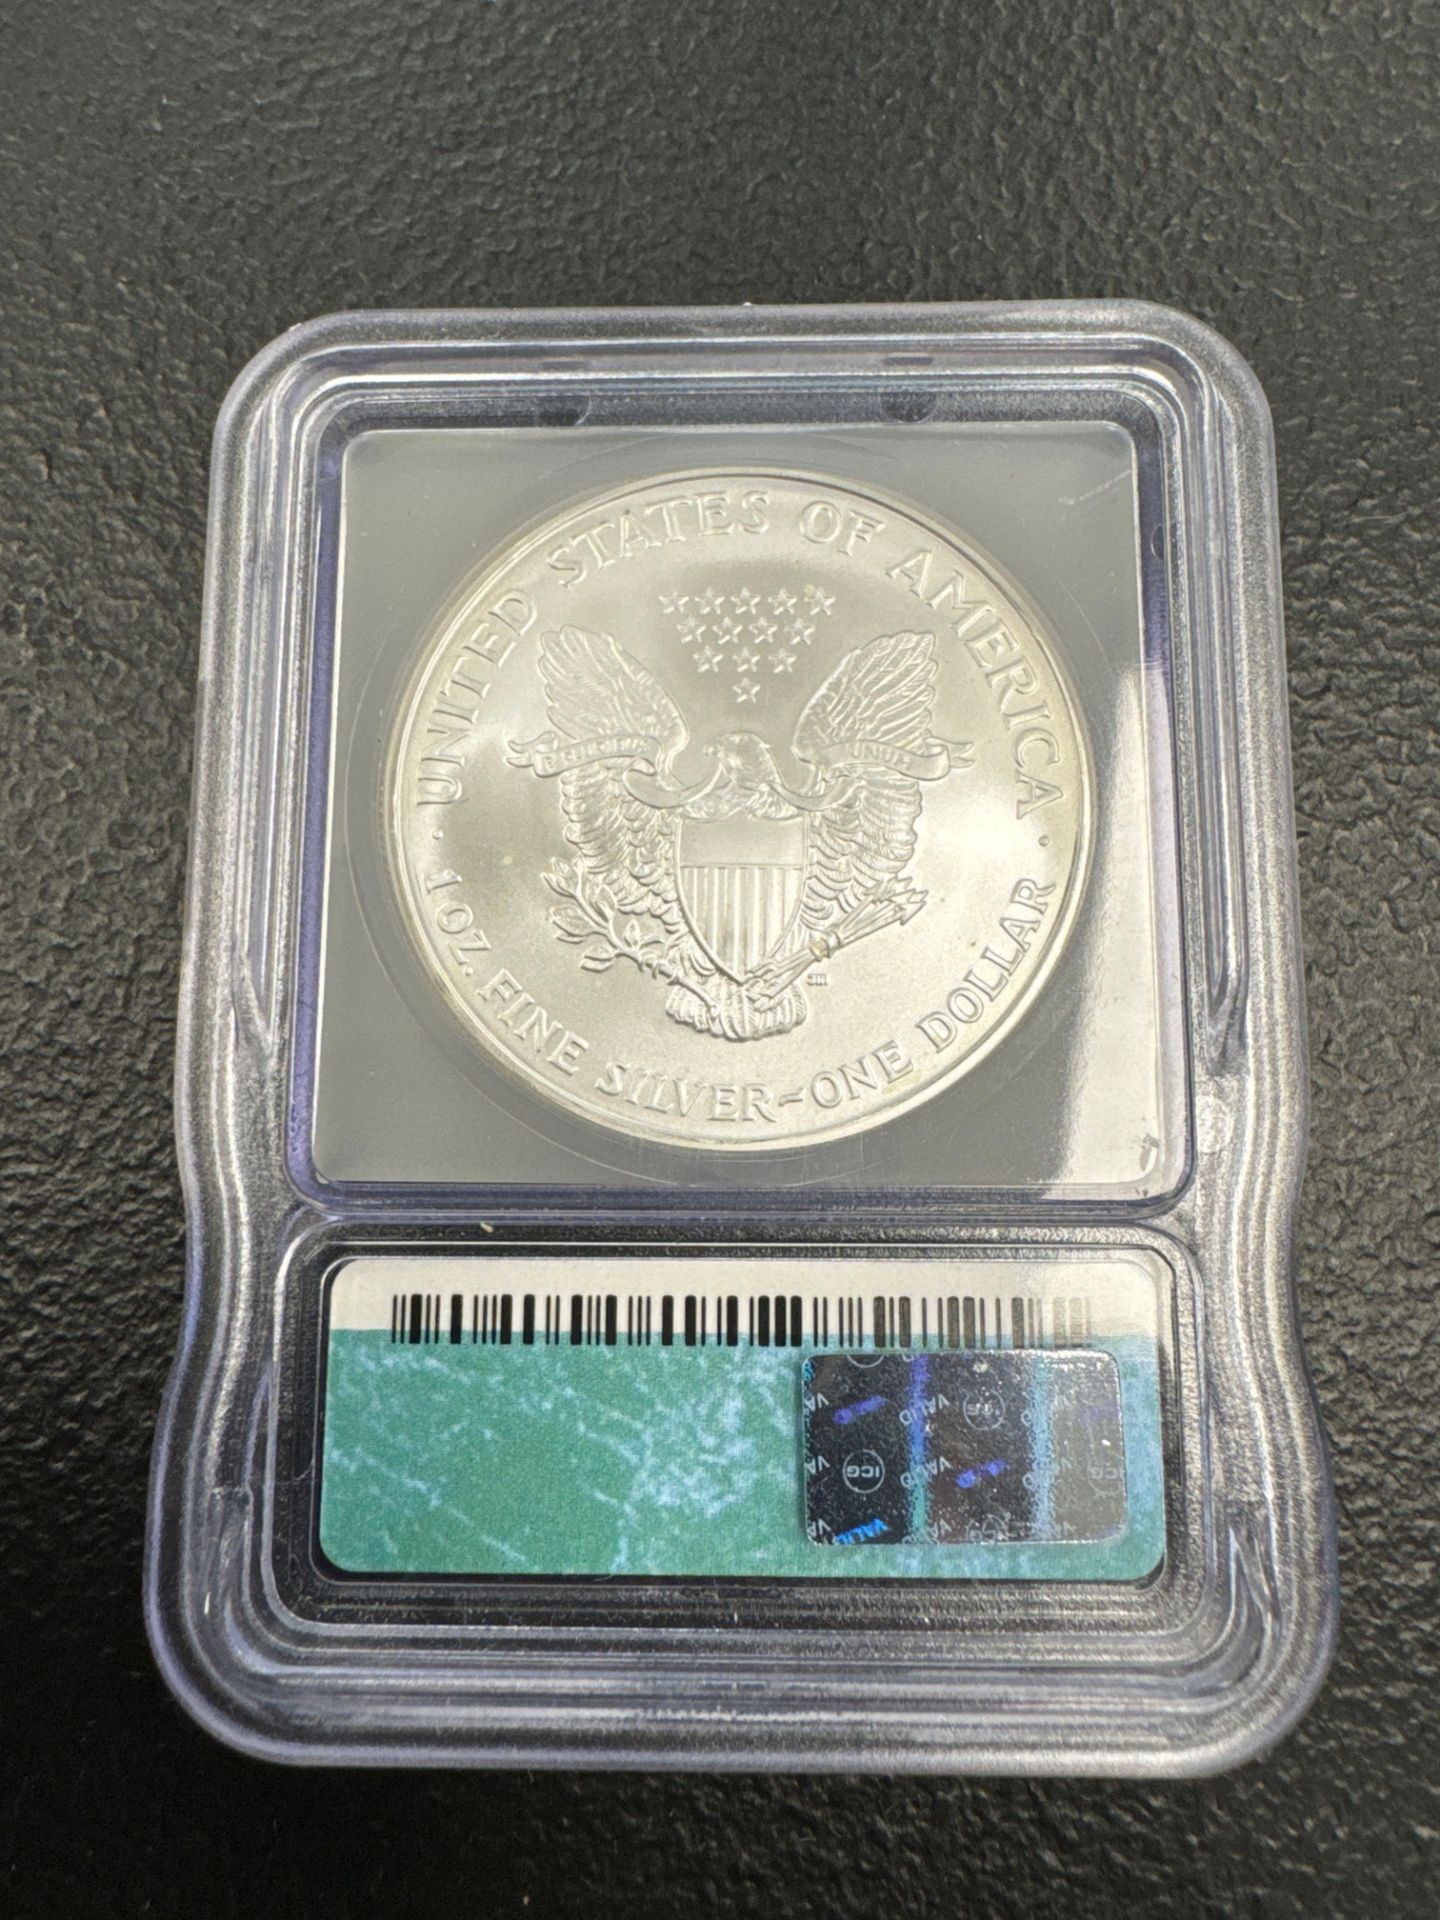 2-2007 Silver Eagles, certified MS69 and MS70 - Image 5 of 5